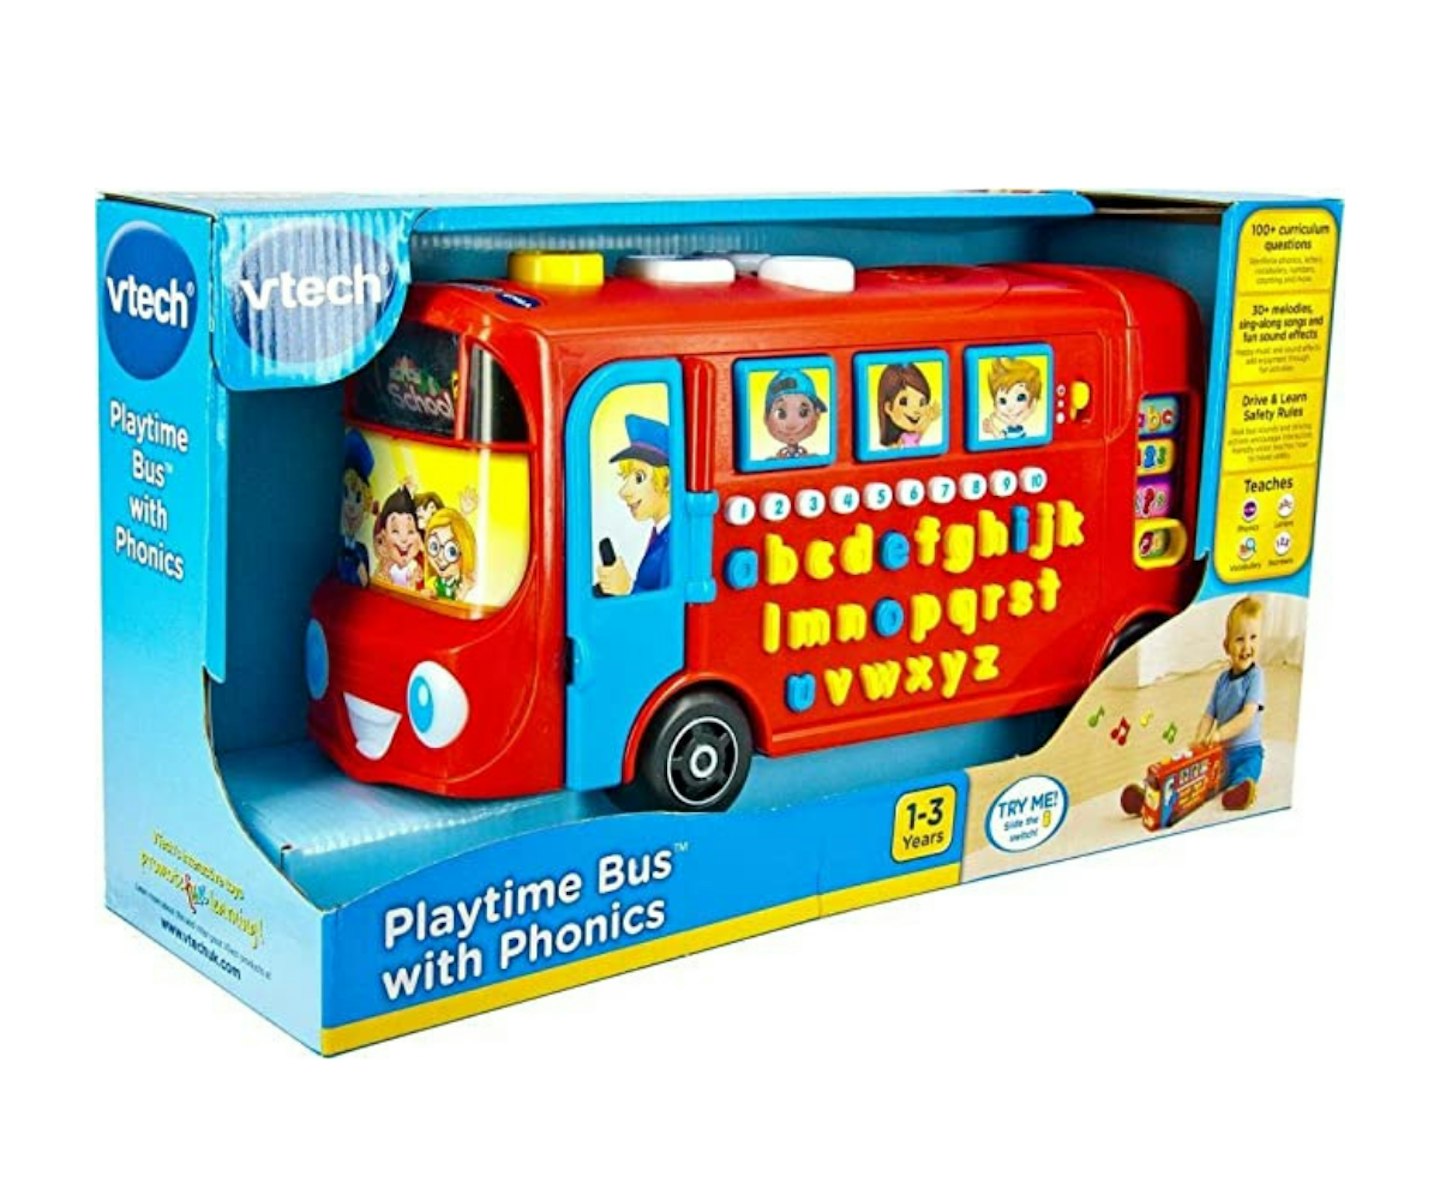 Vtech 150003 Playtime Bus Educational Playset Learning Toy